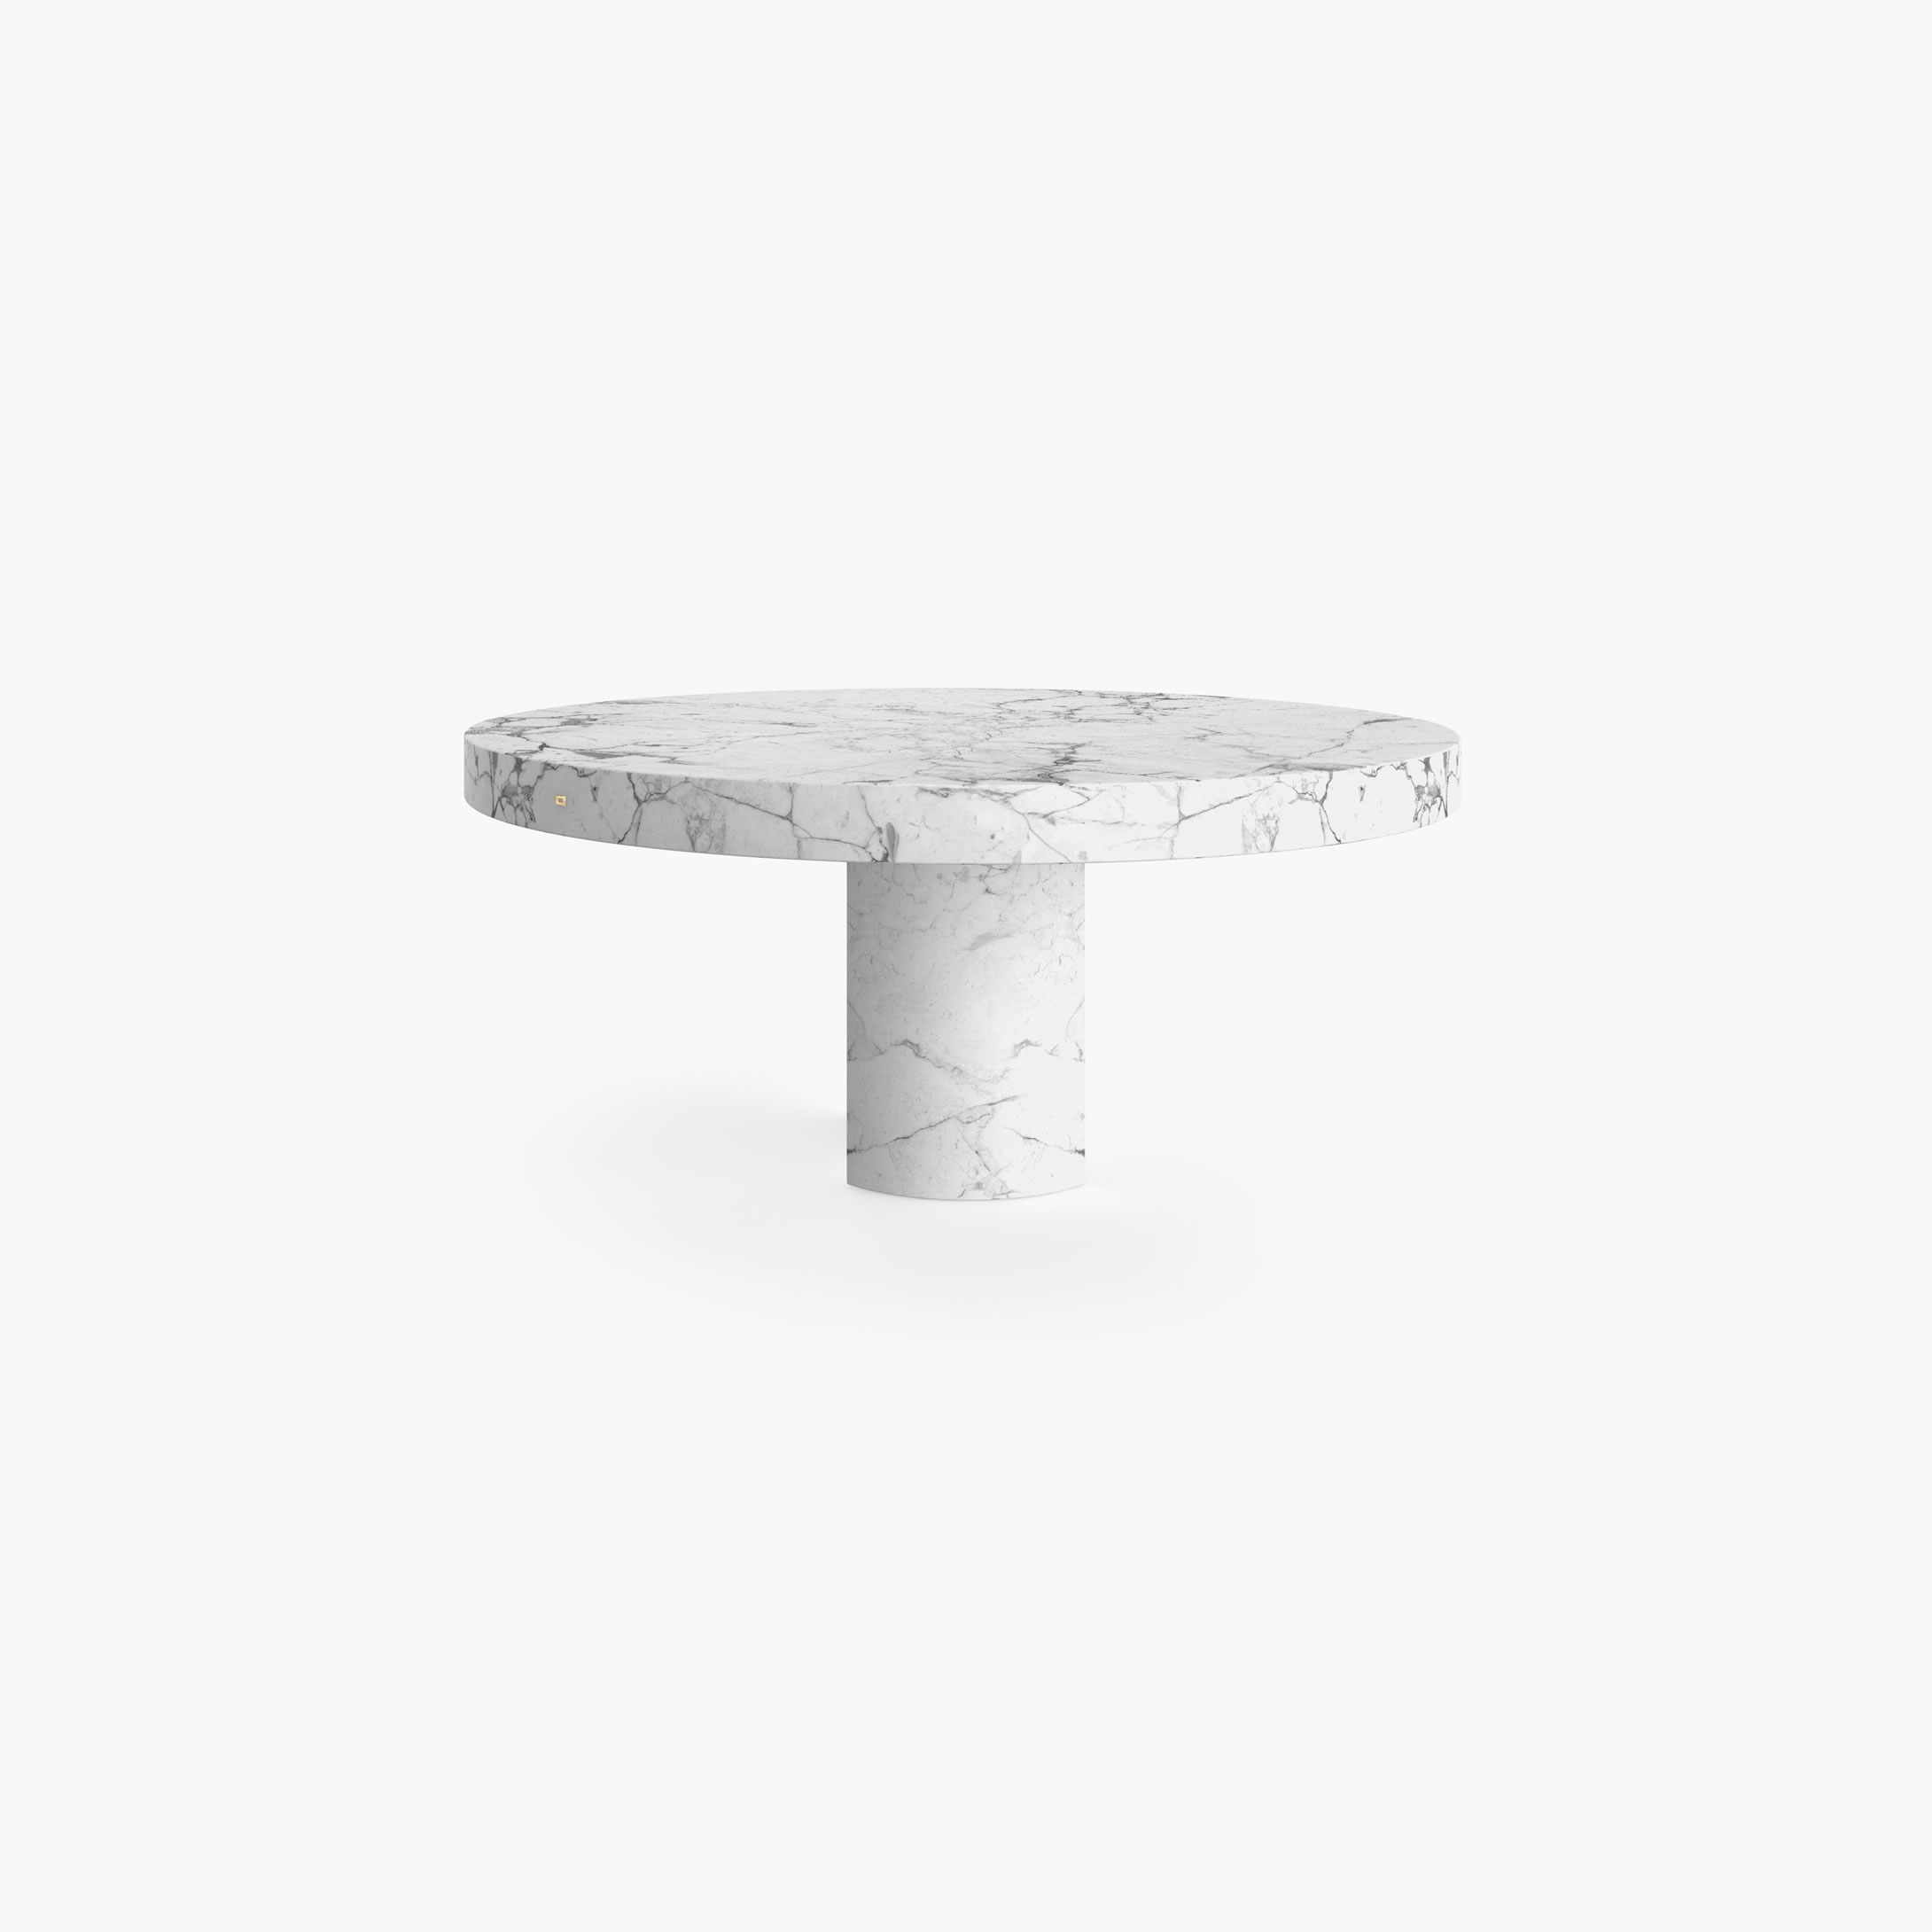 Dining Table round quarter cylinder segments legs White Arabescato Marble statement Dining Room furniture design Dining Tables FS 194 A FELIX SCHWAKE